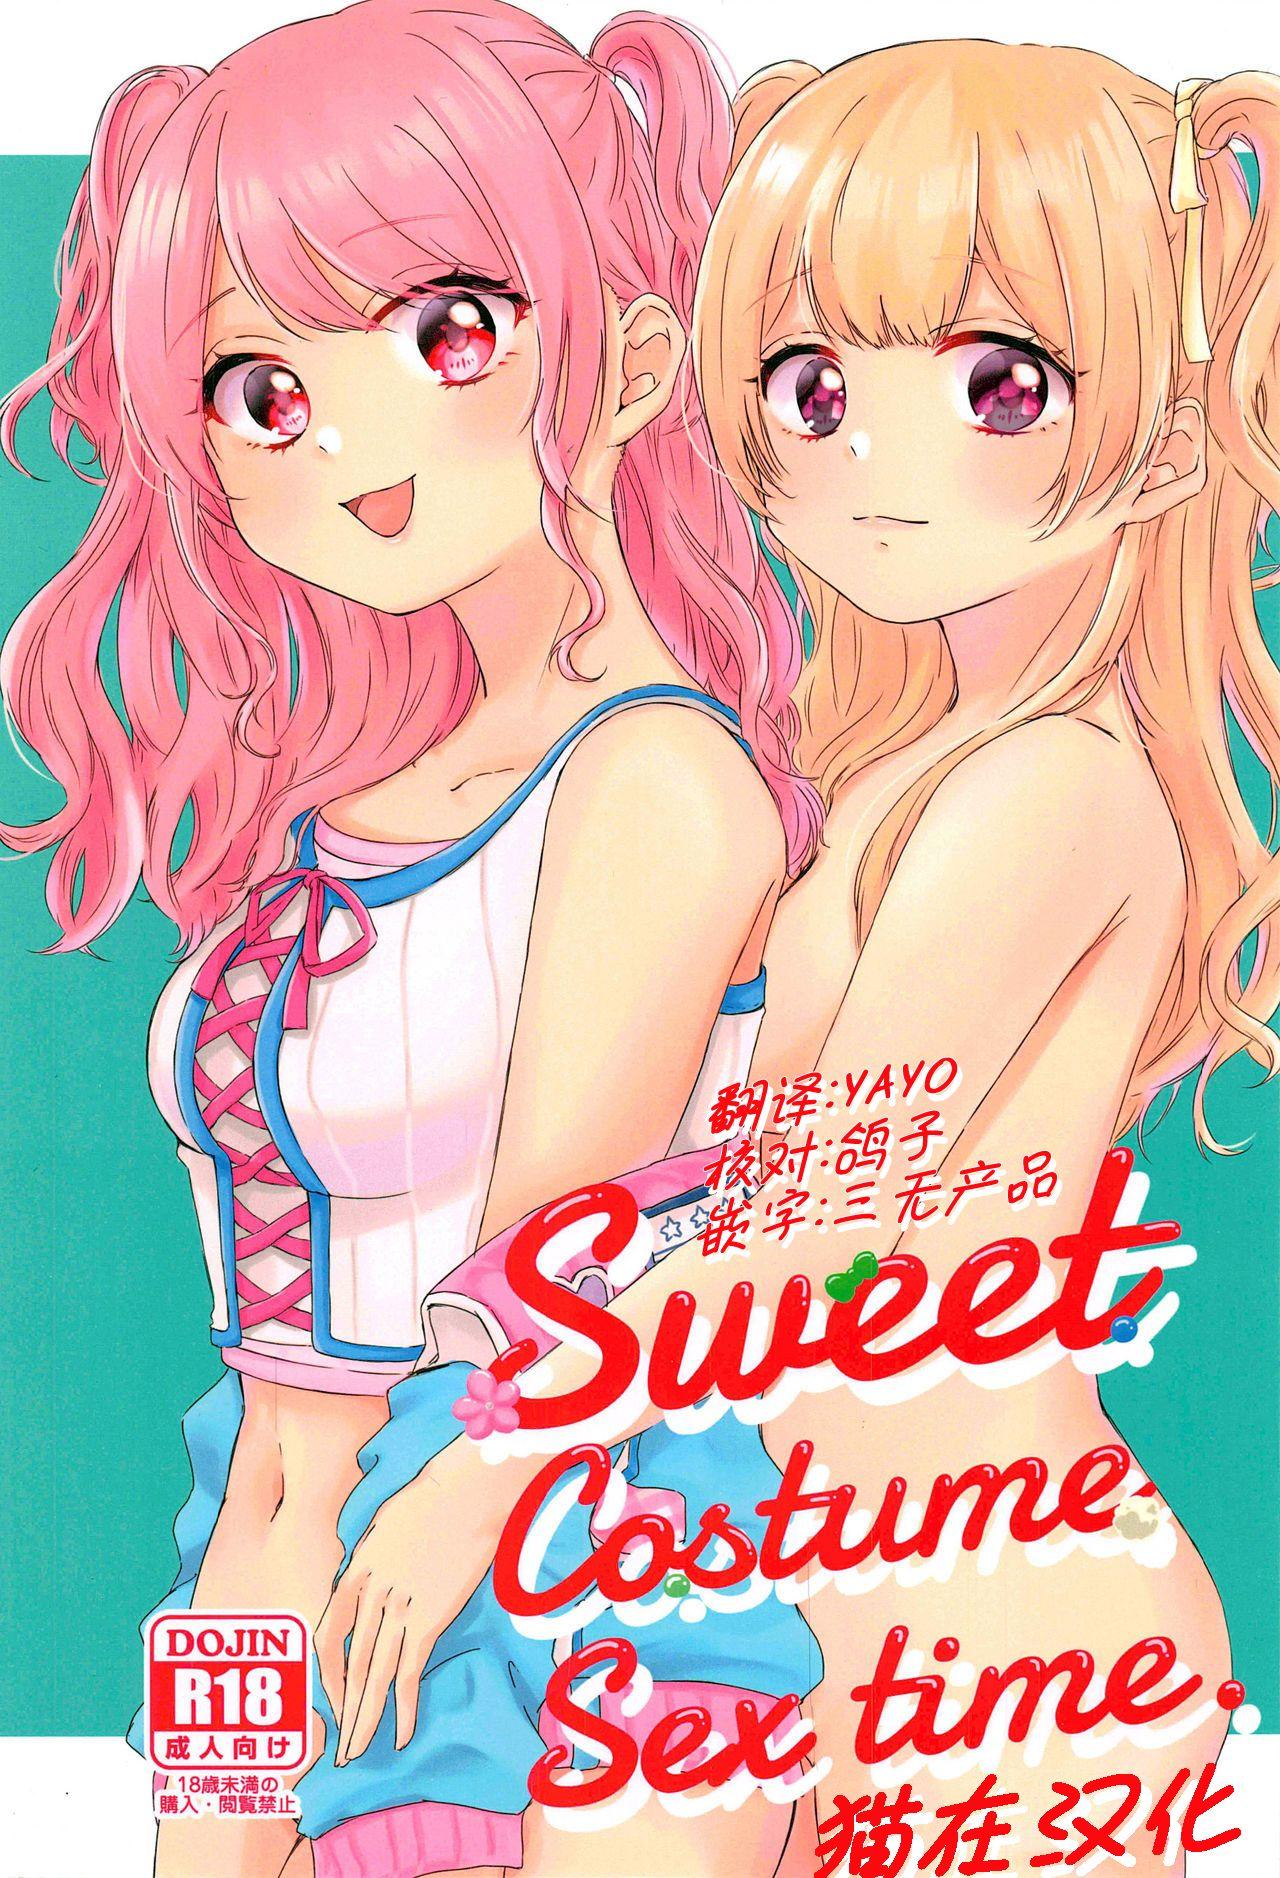 Boyfriend Sweet Costume Sex time. - Bang dream Tits - Page 1